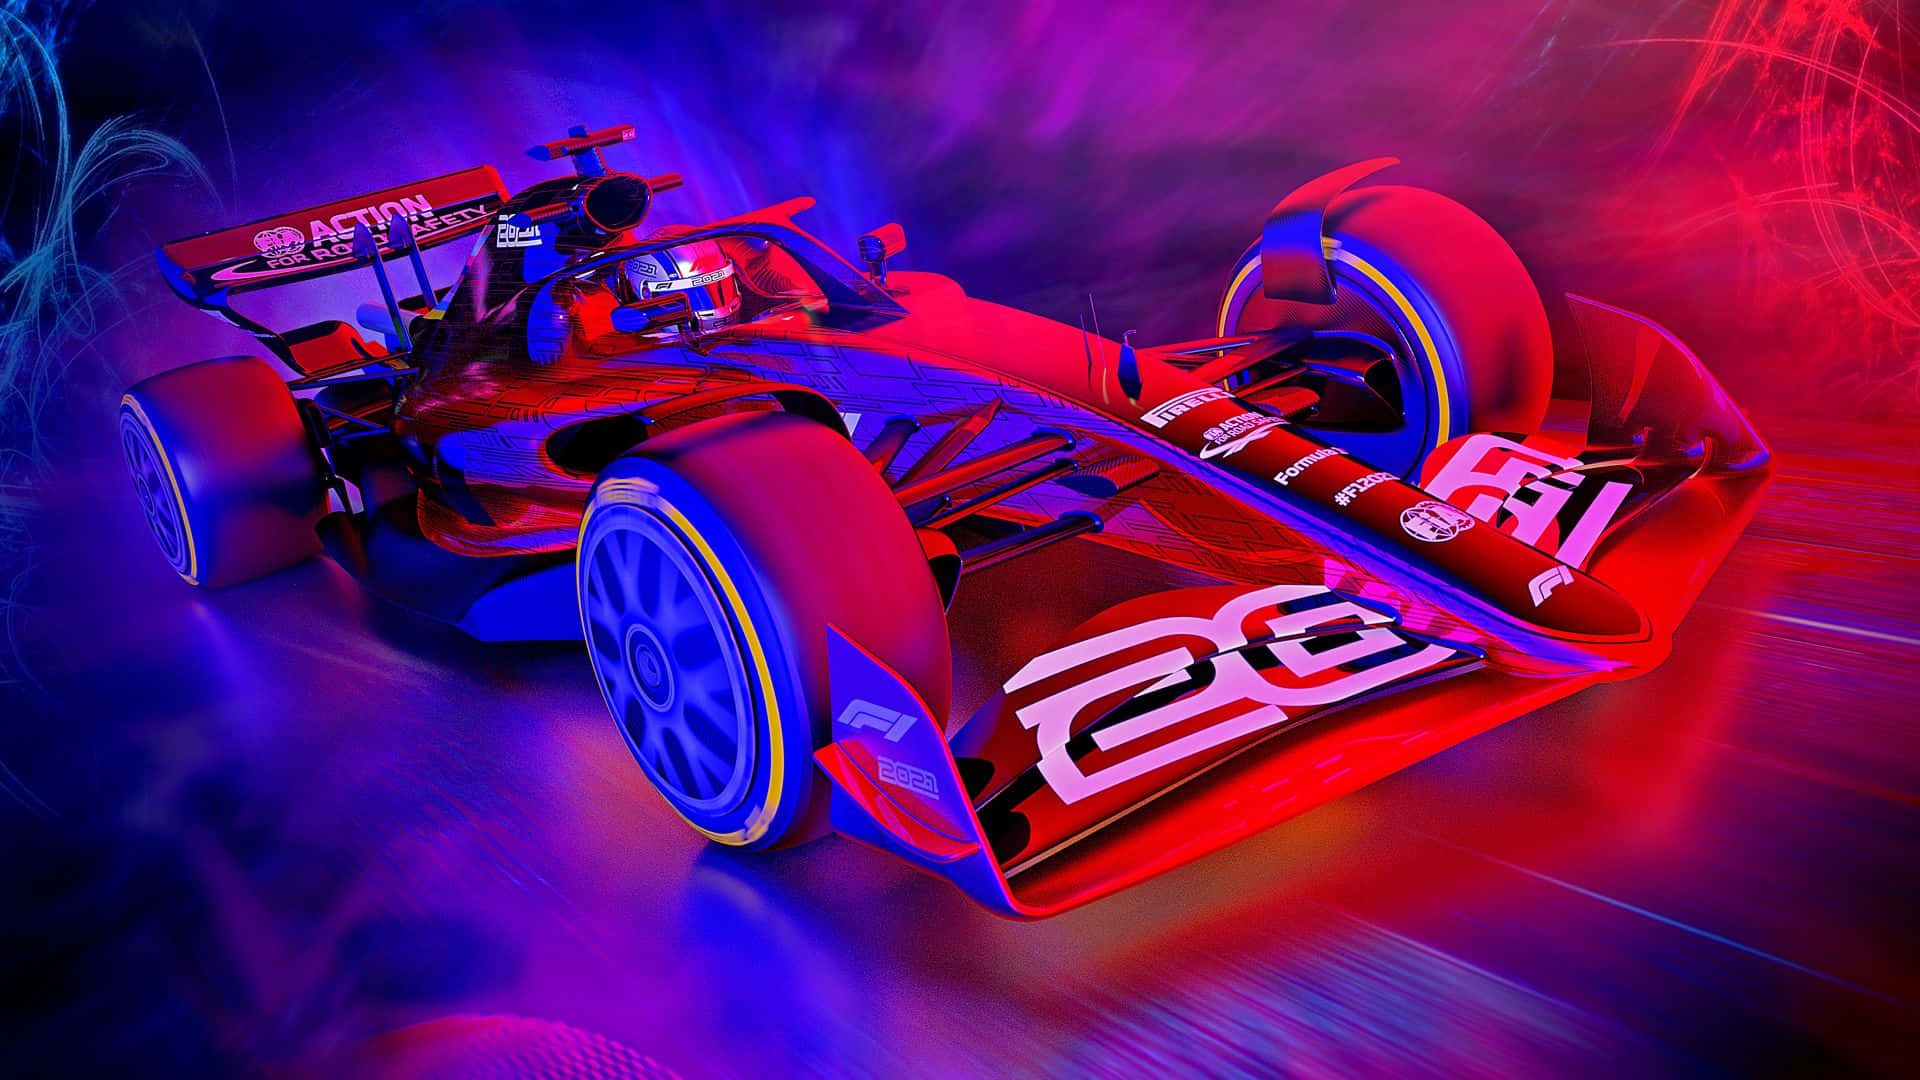 F1 Game Race Car Purple And Red Aesthetic Wallpaper